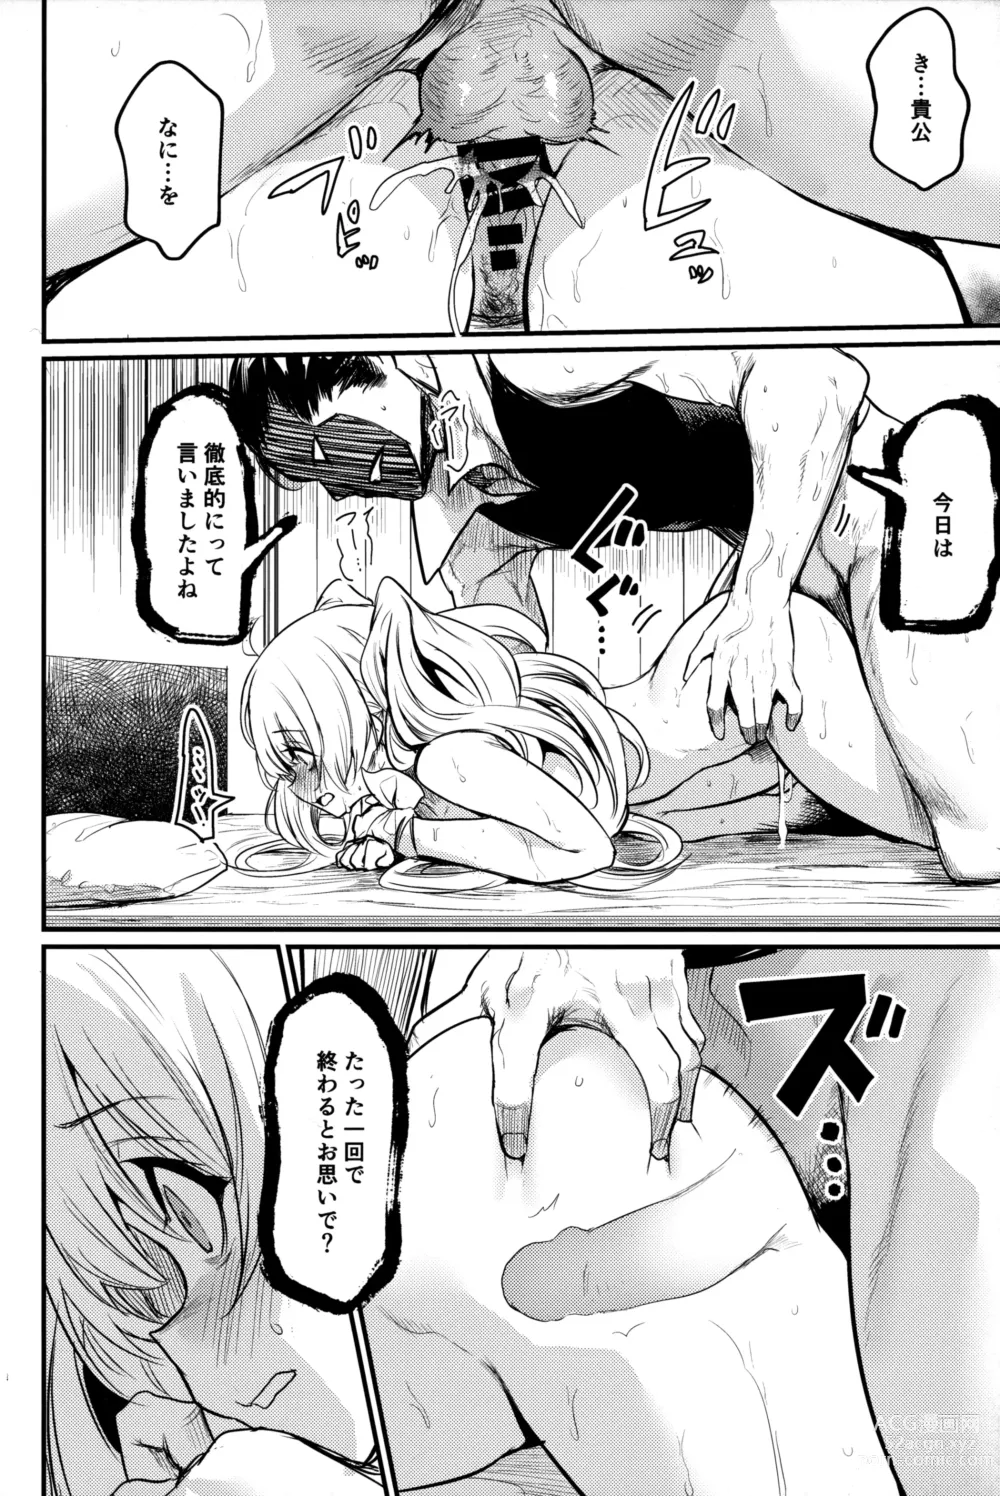 Page 21 of doujinshi Chitsujo Another